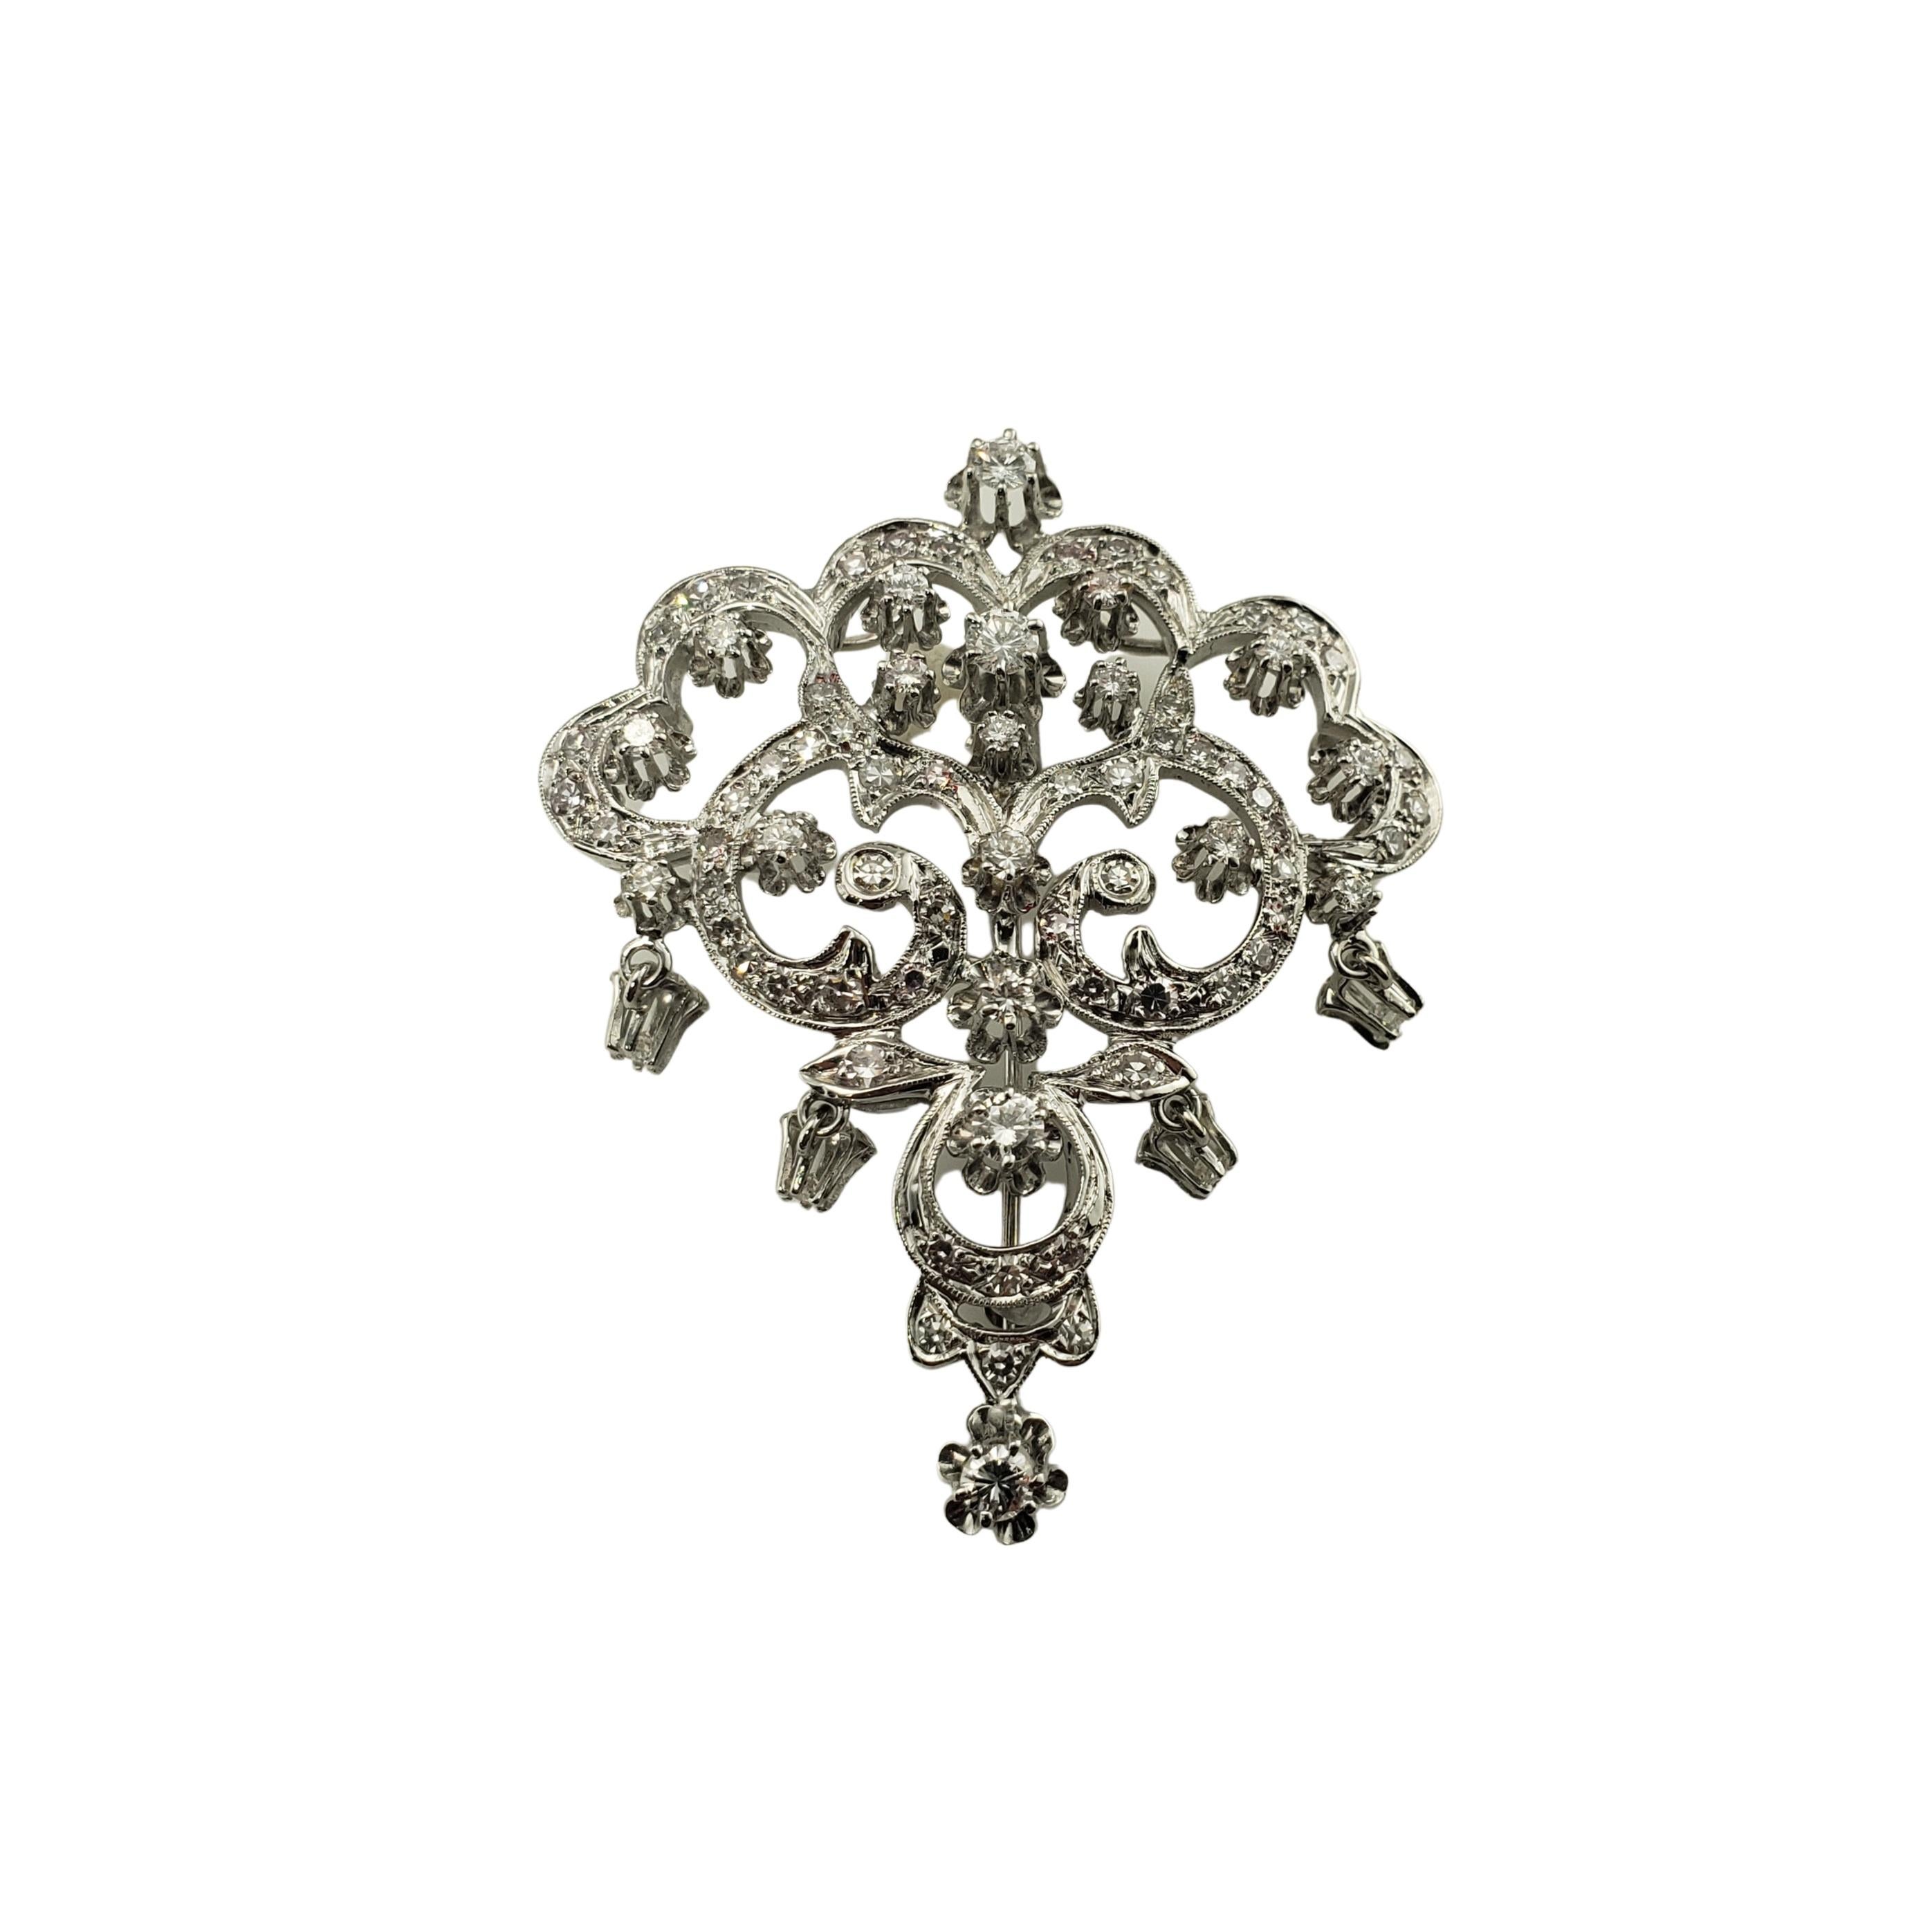 Vintage 14 Karat White Gold and Diamond Brooch-

This sparkling brooch features 66 round brilliant cut diamonds set in beautifully detailed 14K white gold.

Approximate total diamond weight: 1.25 ct.

Diamond clarity: VS1

Diamond color: G

Size: 2